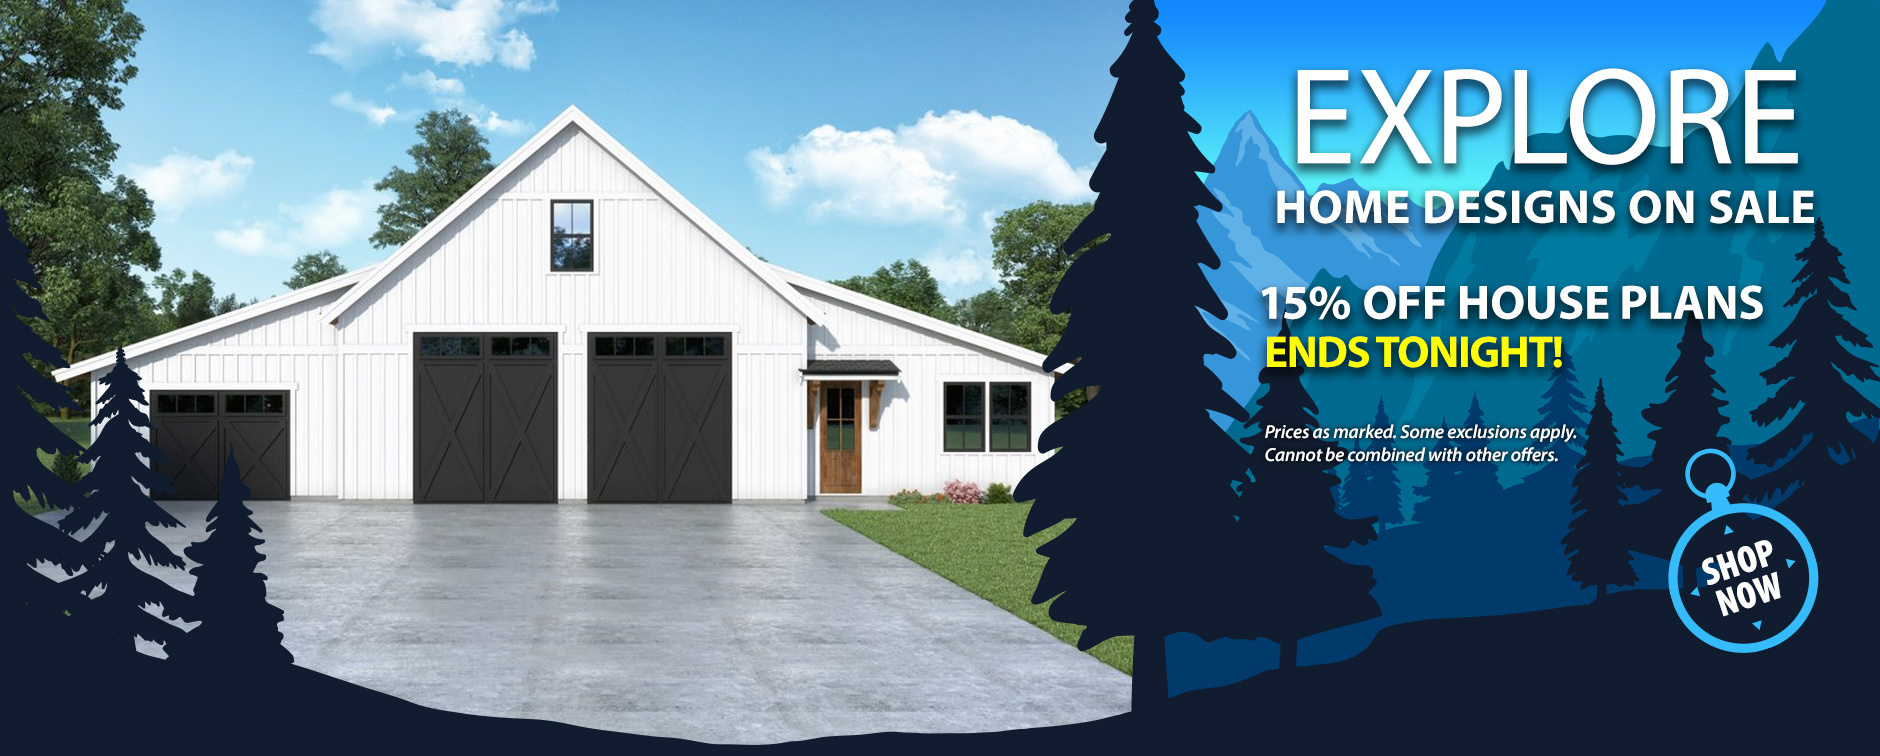 Enjoy 15% Off House Plans - Last Day to Save